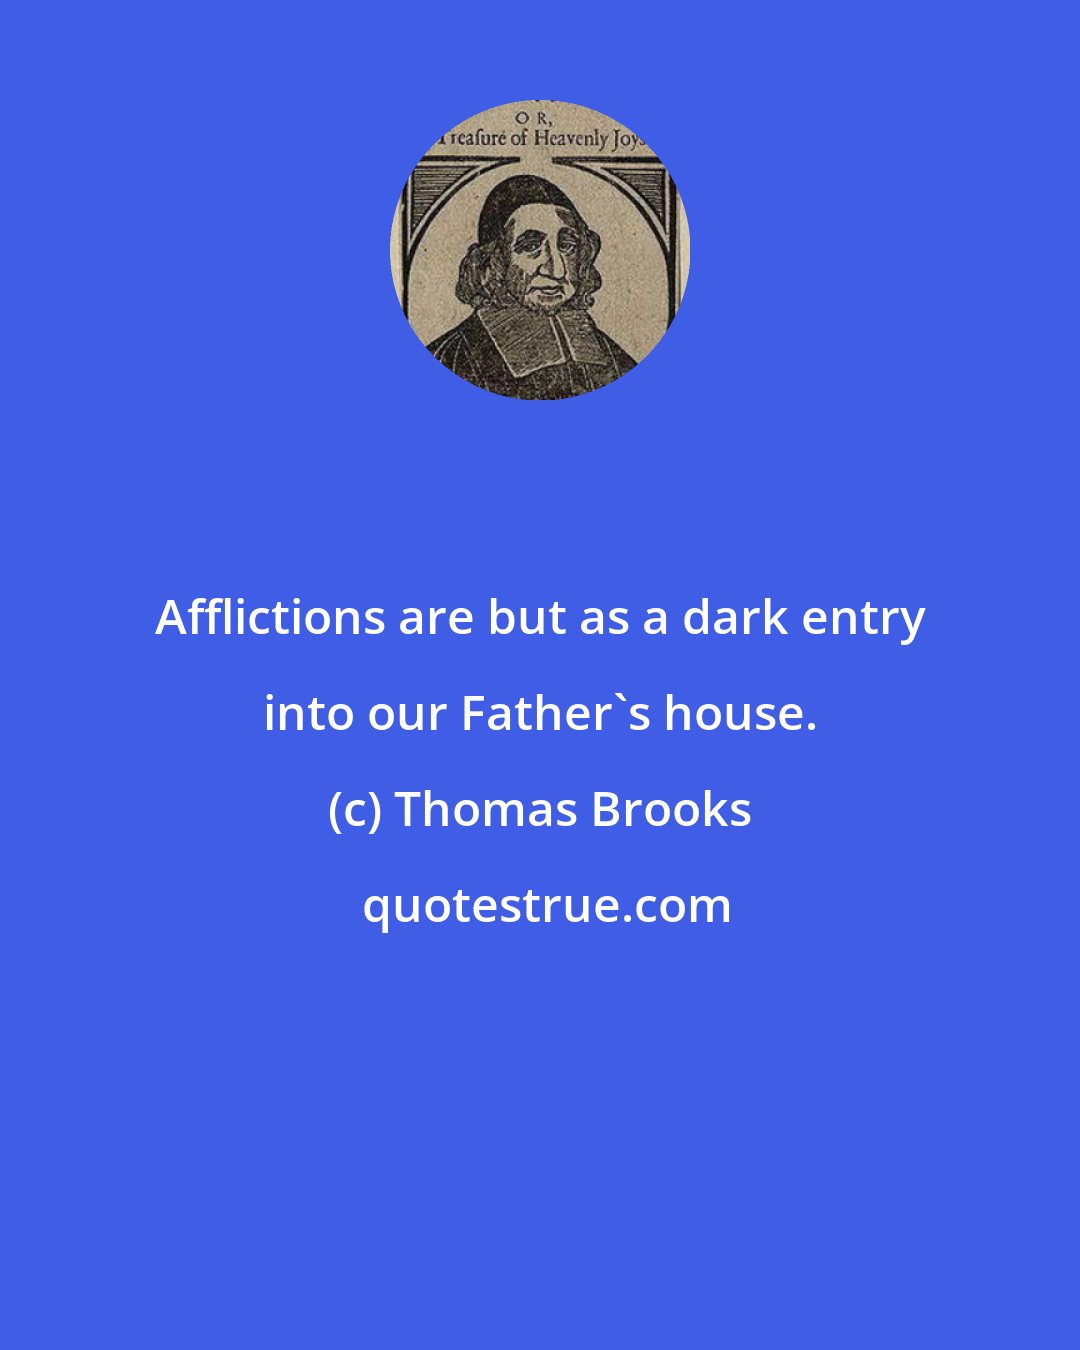 Thomas Brooks: Afflictions are but as a dark entry into our Father's house.